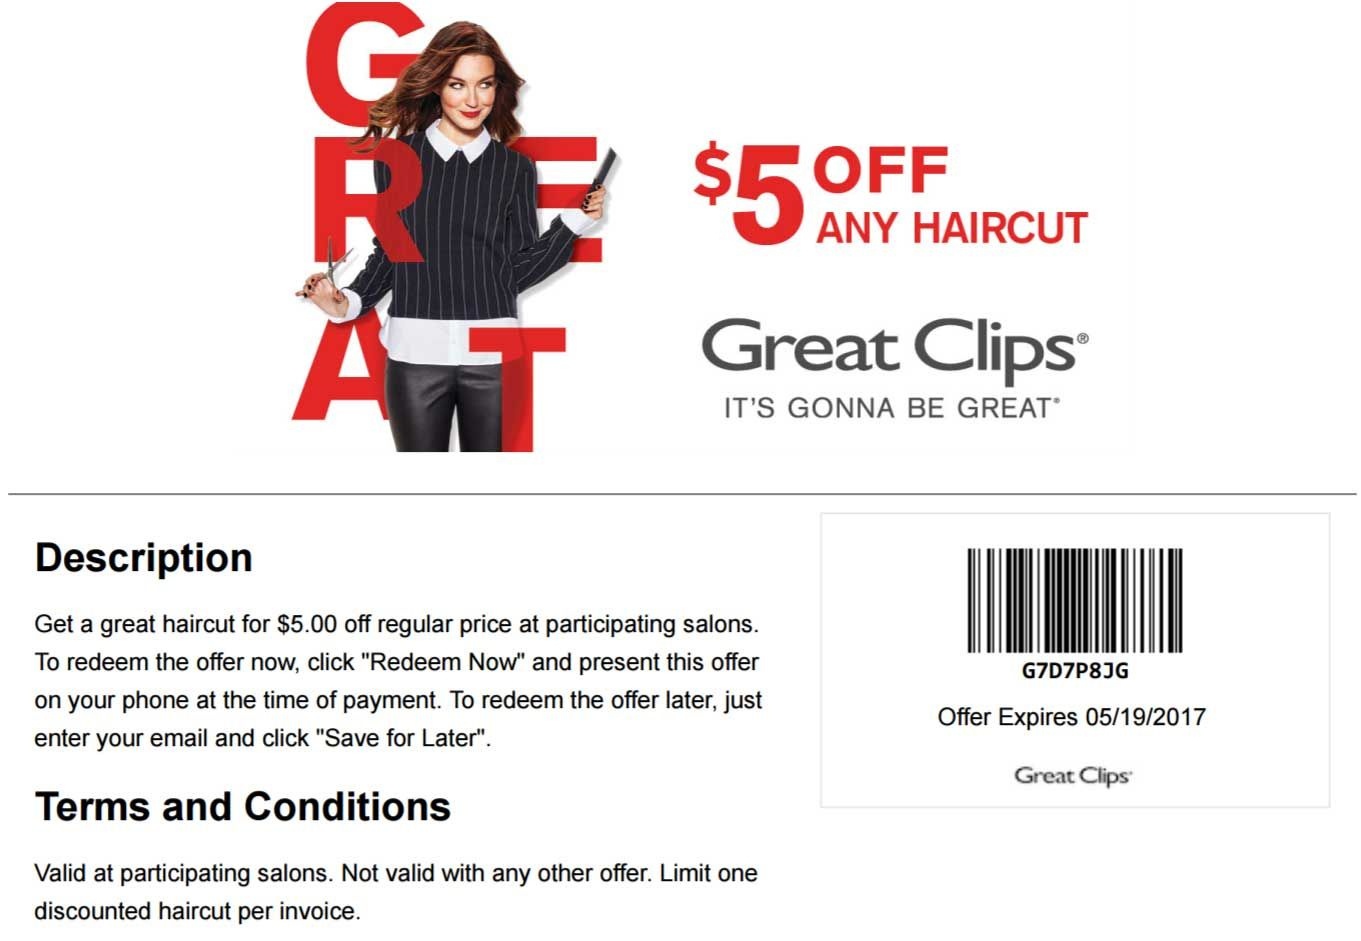 Pinned April 27th 5 Off A Haircut At Greatclips Coupon Via The Sports Clips Free Haircut Printable Coupon 